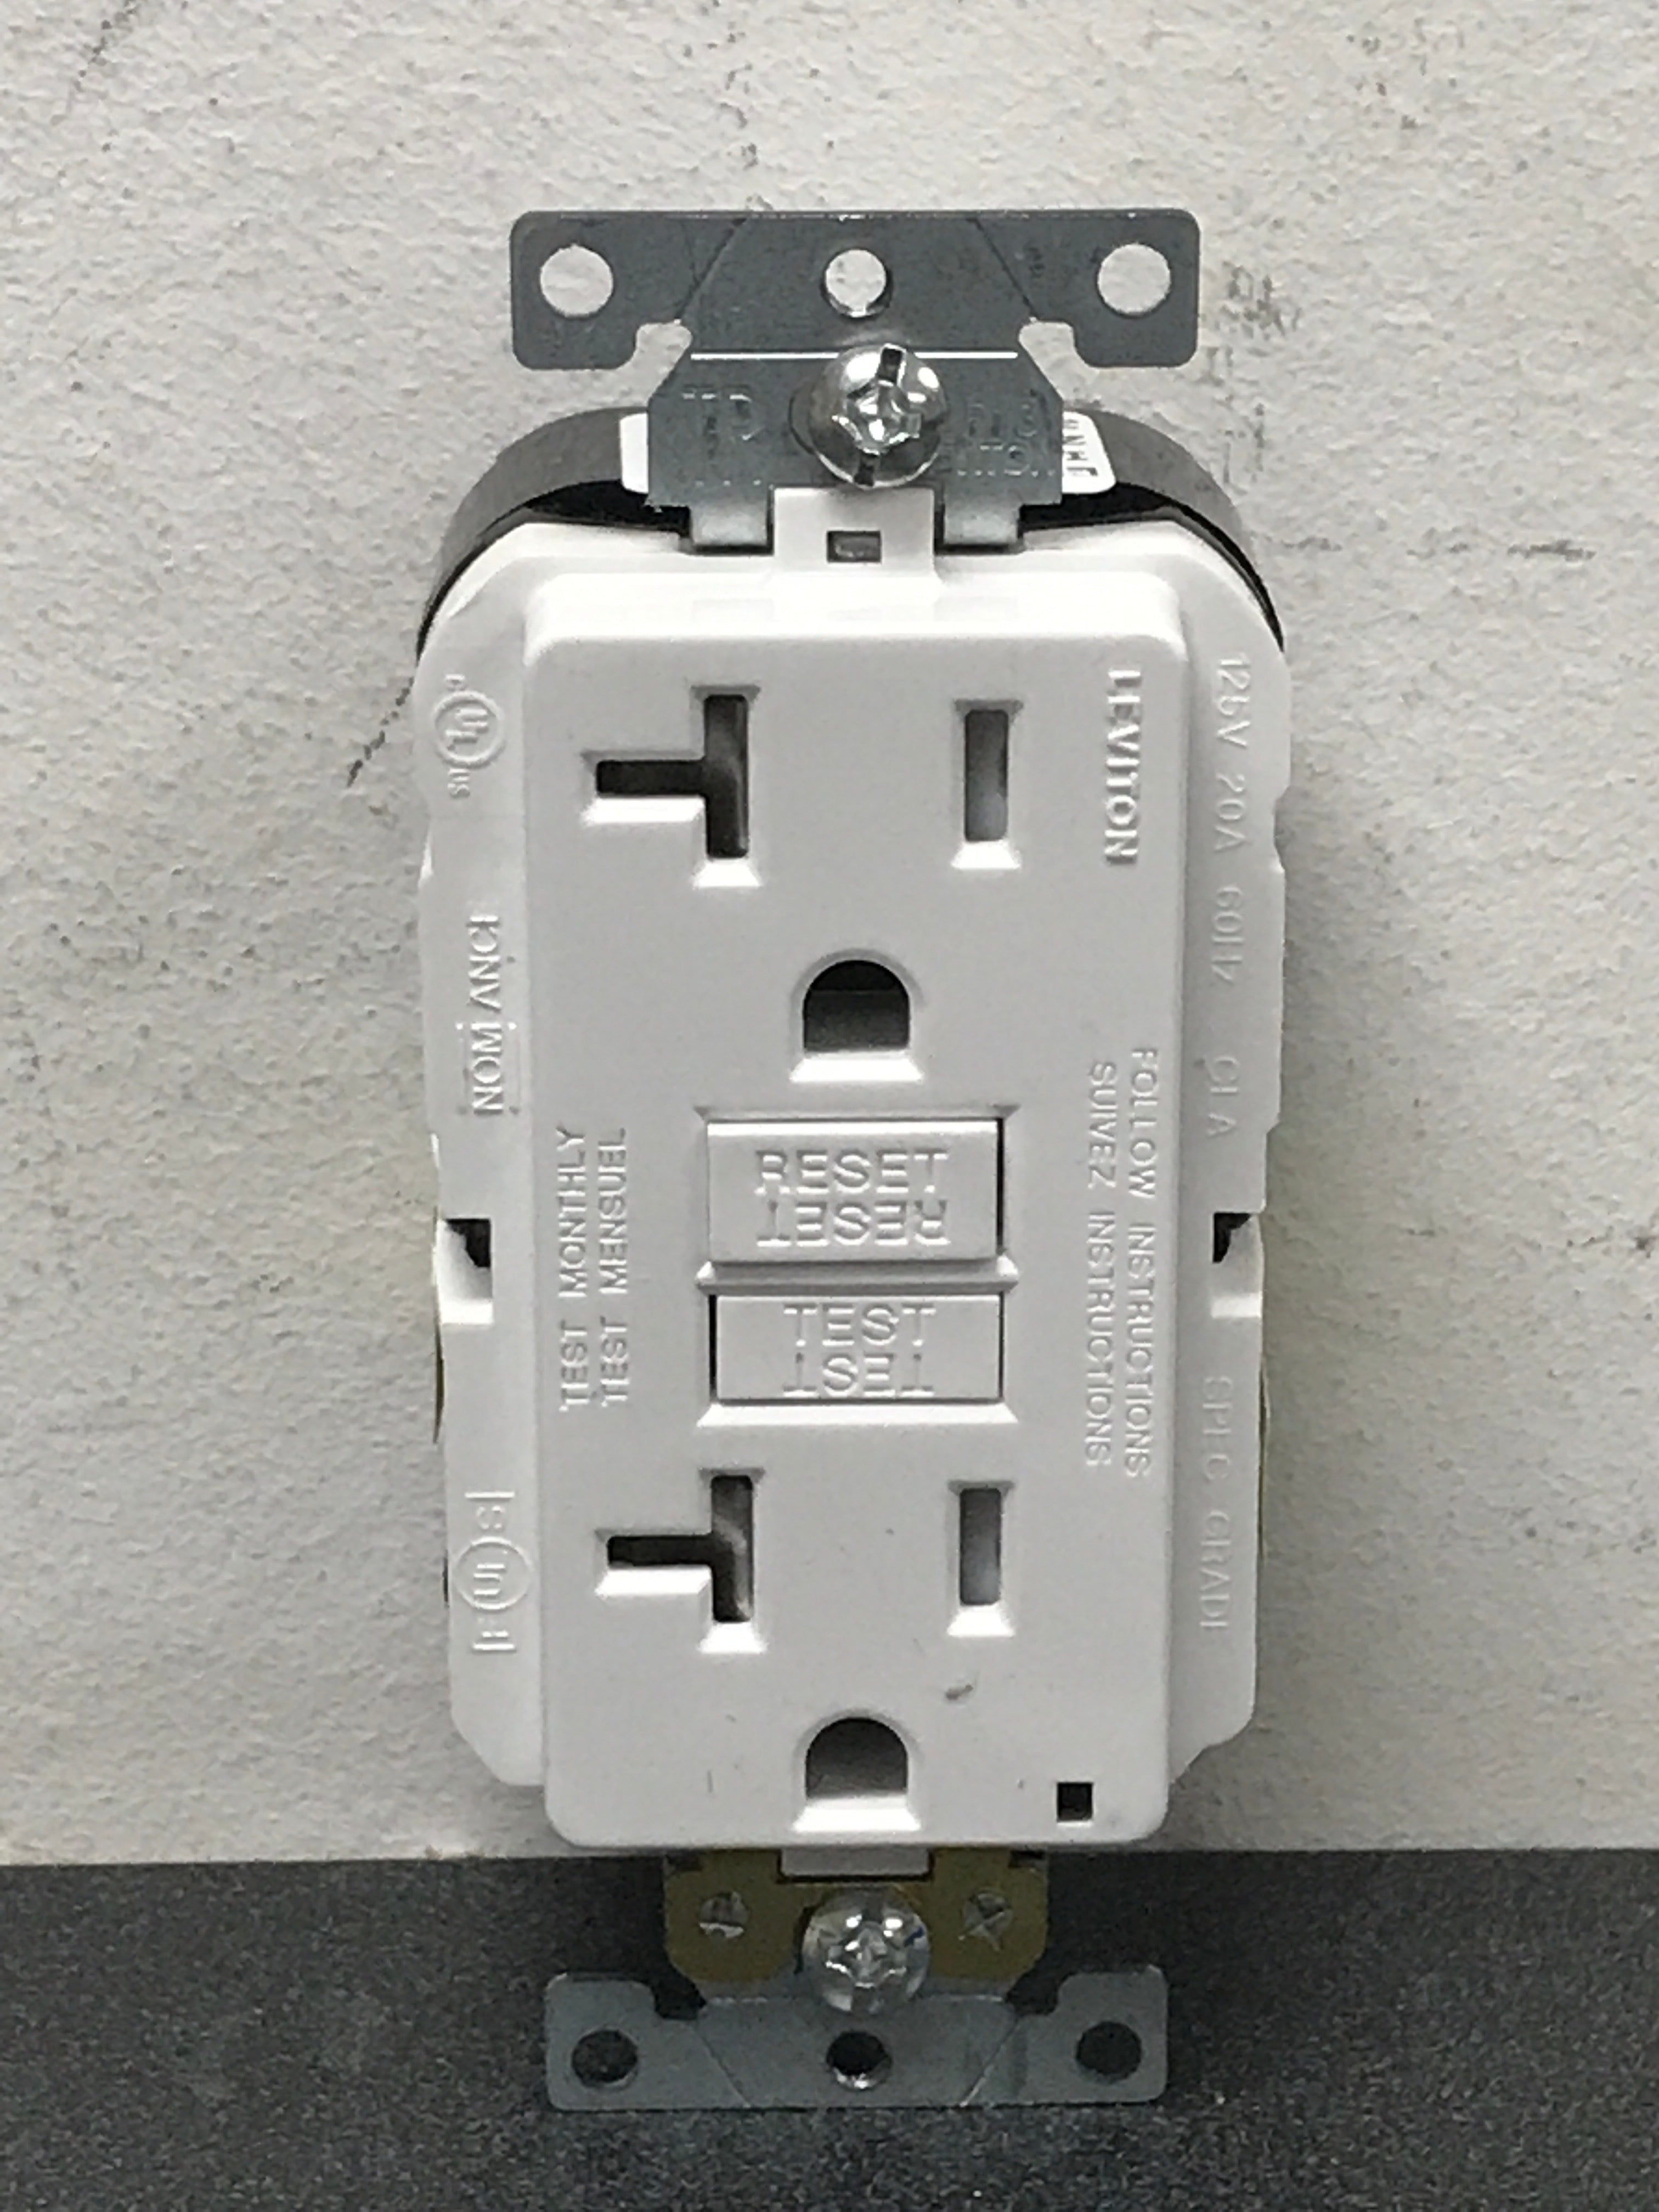 Leviton MGFT2-W 20 Amp Lev-Lok Modular Wiring Device SmartlockPro Industrial Grade GFCI Outlet, White